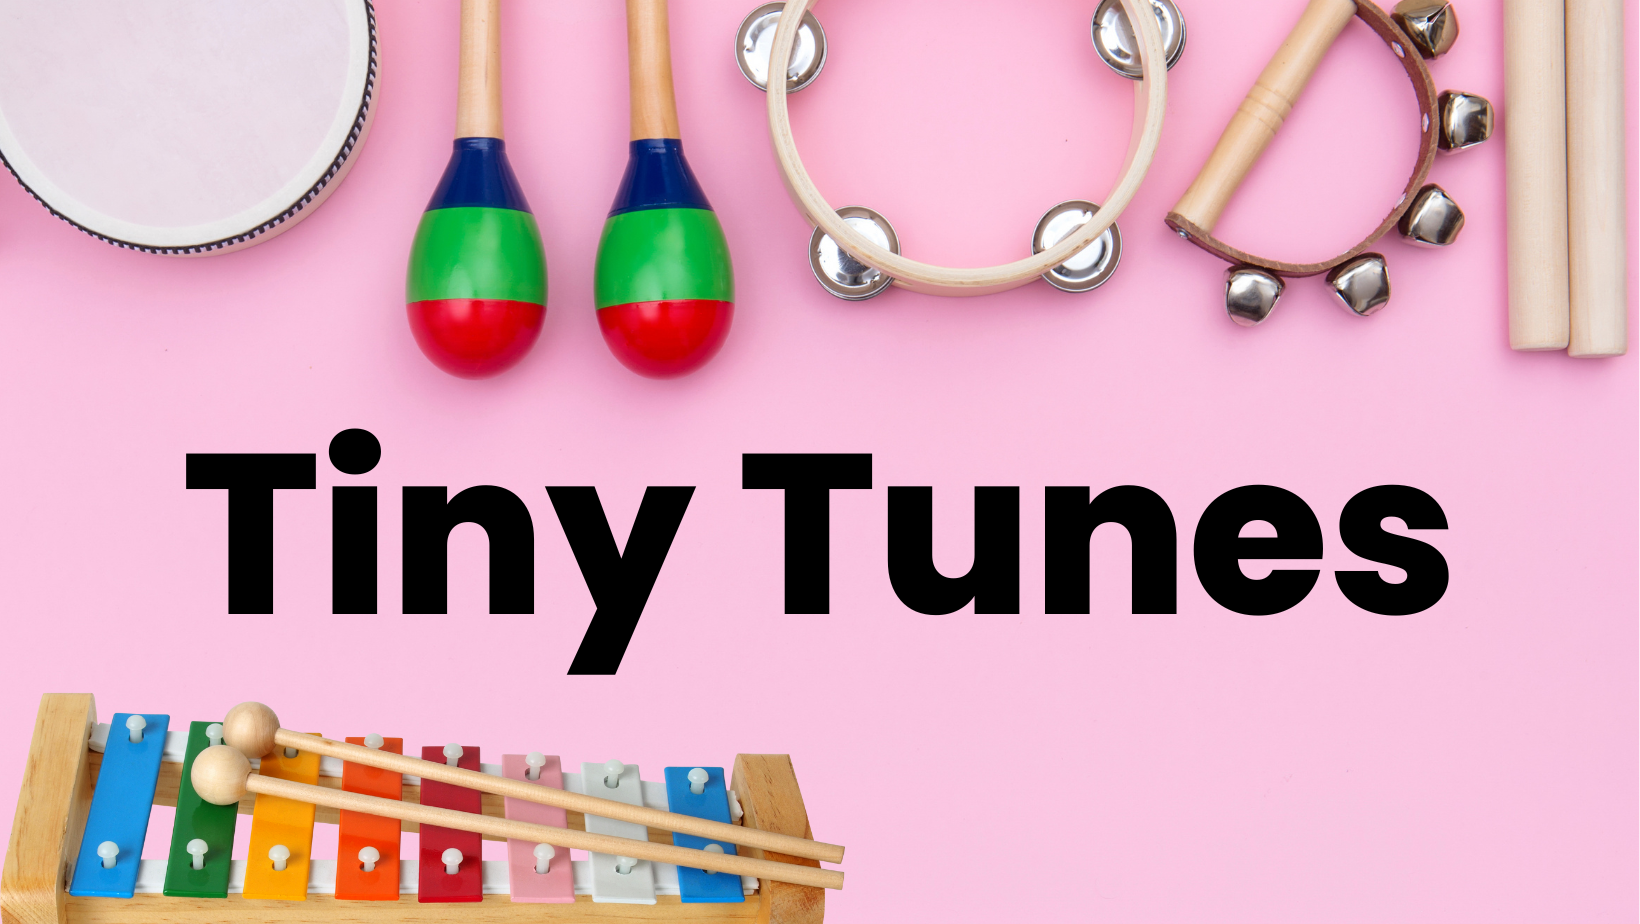 Preschool musical instruments with pink background